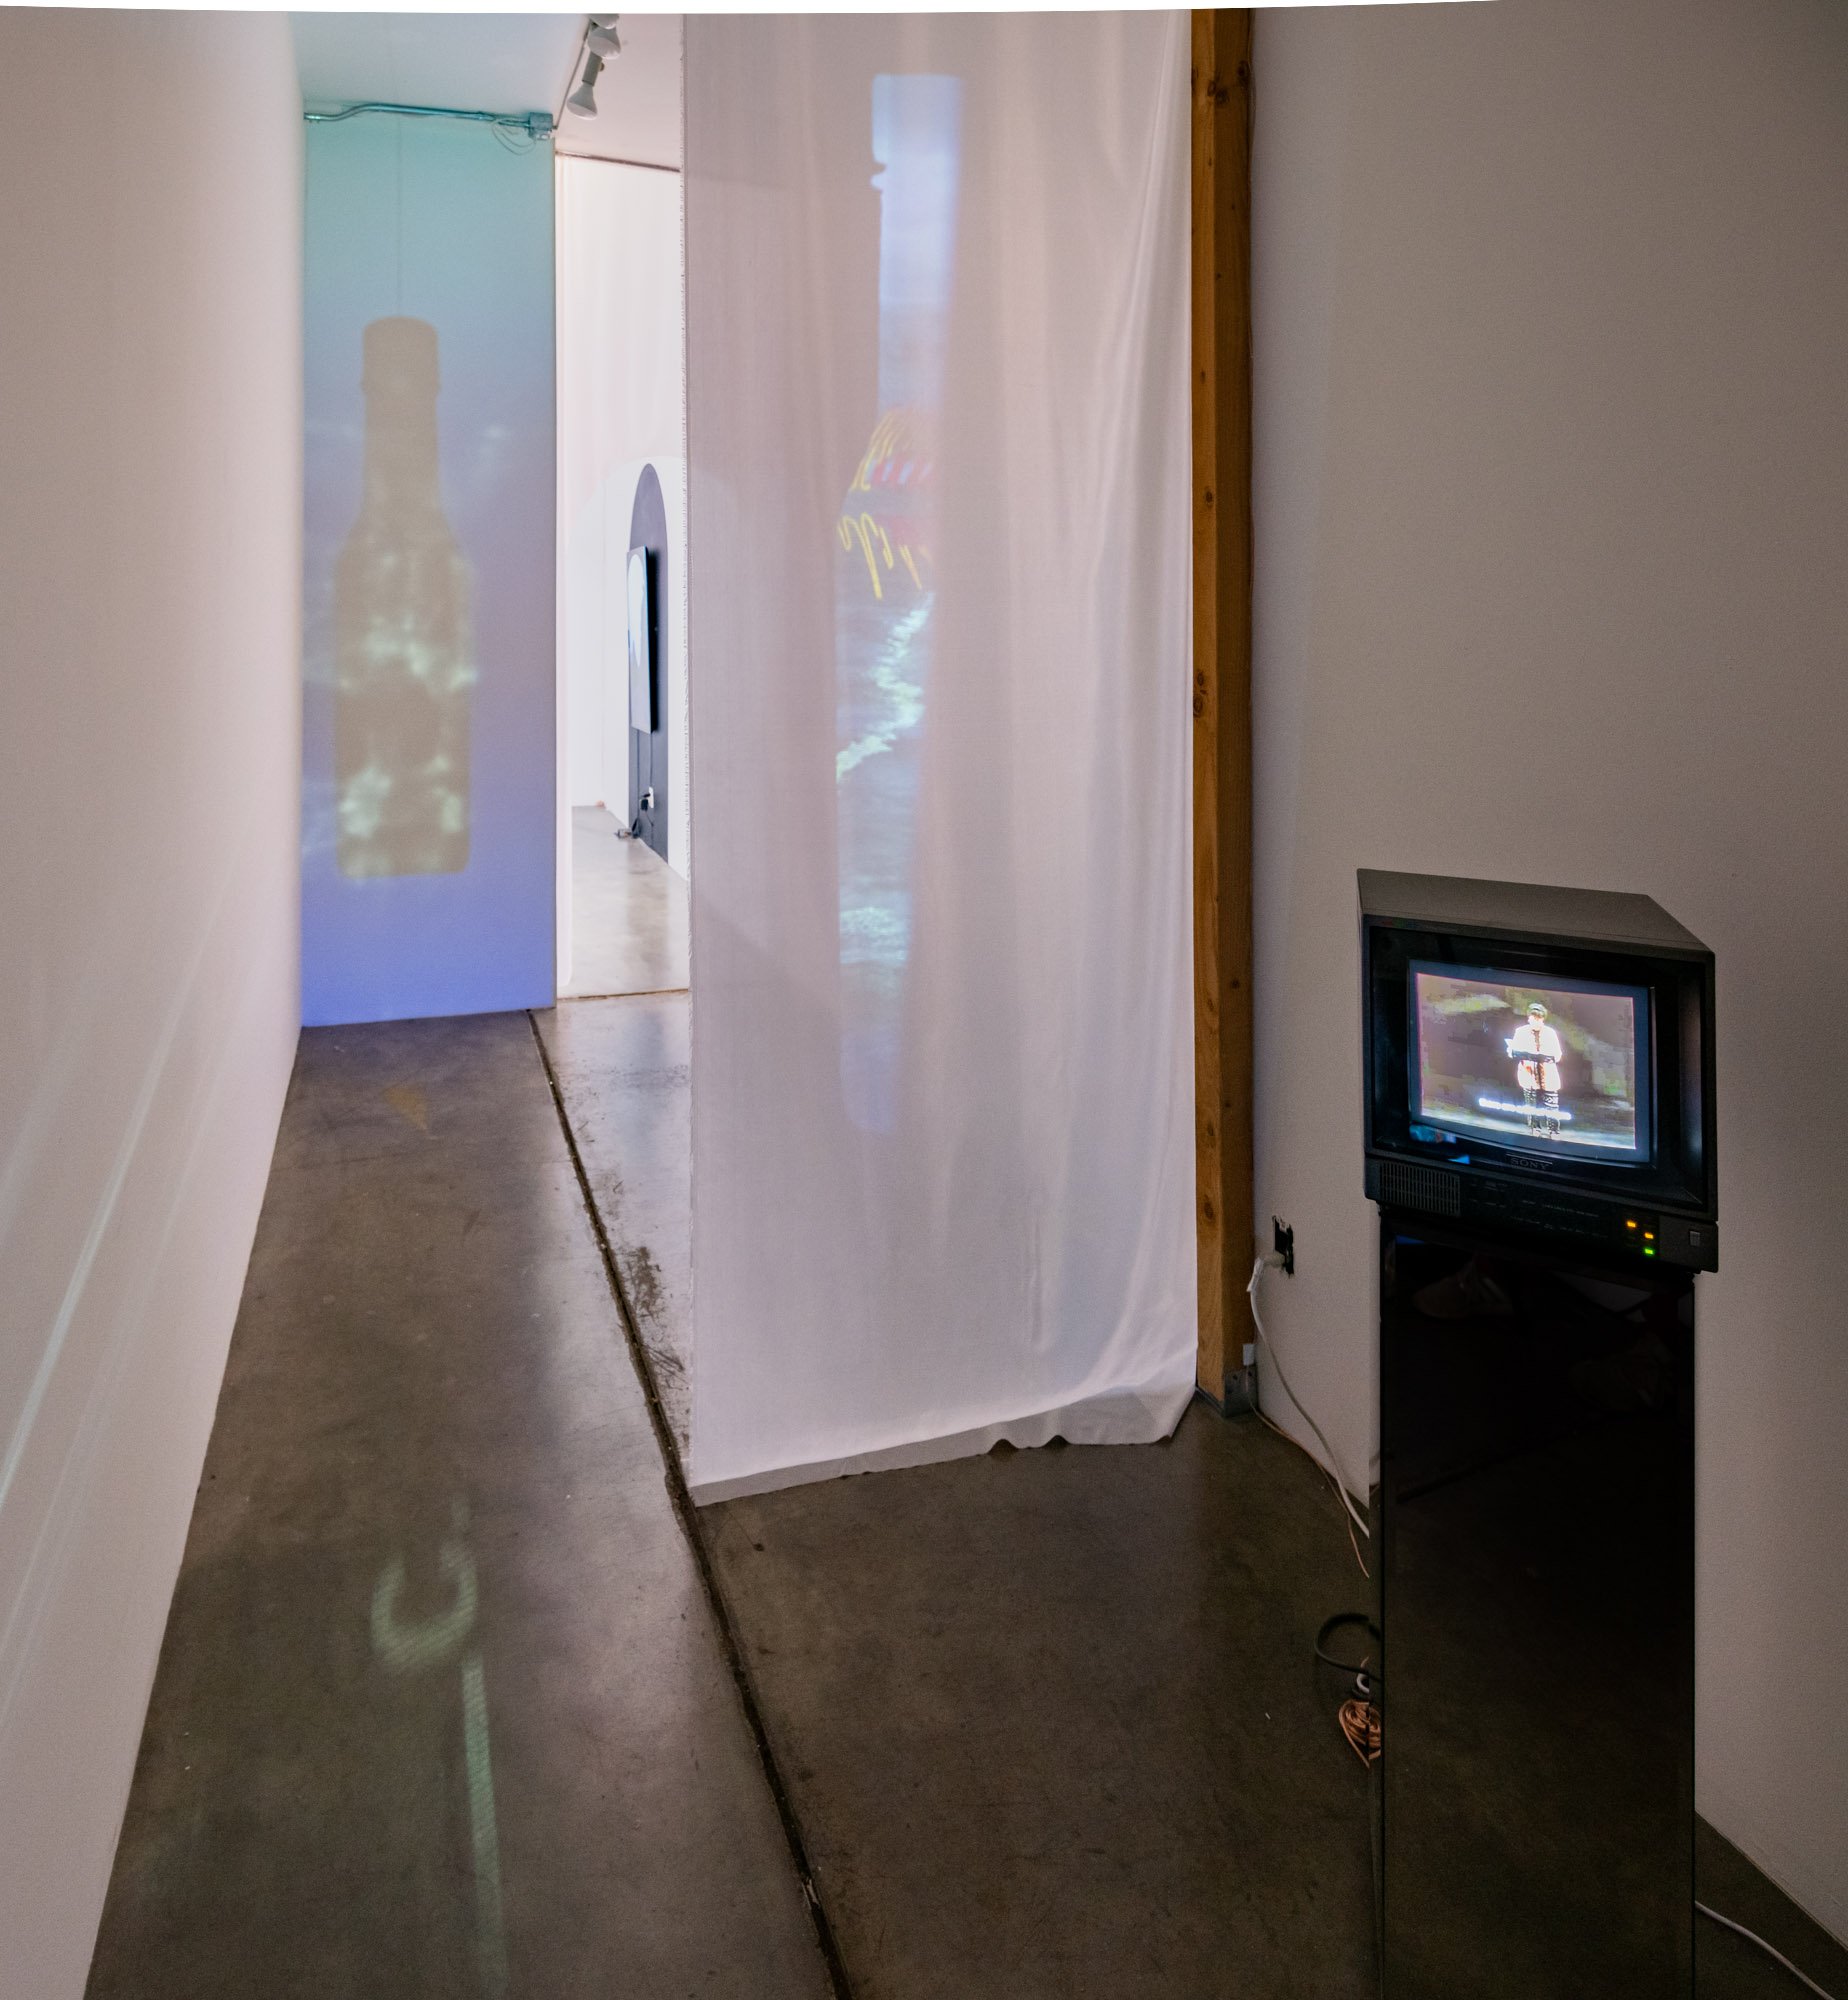 Sharita Towne &amp; garima thakur, Installation view of 'we're out of control'. Photo by Mario Gallucci